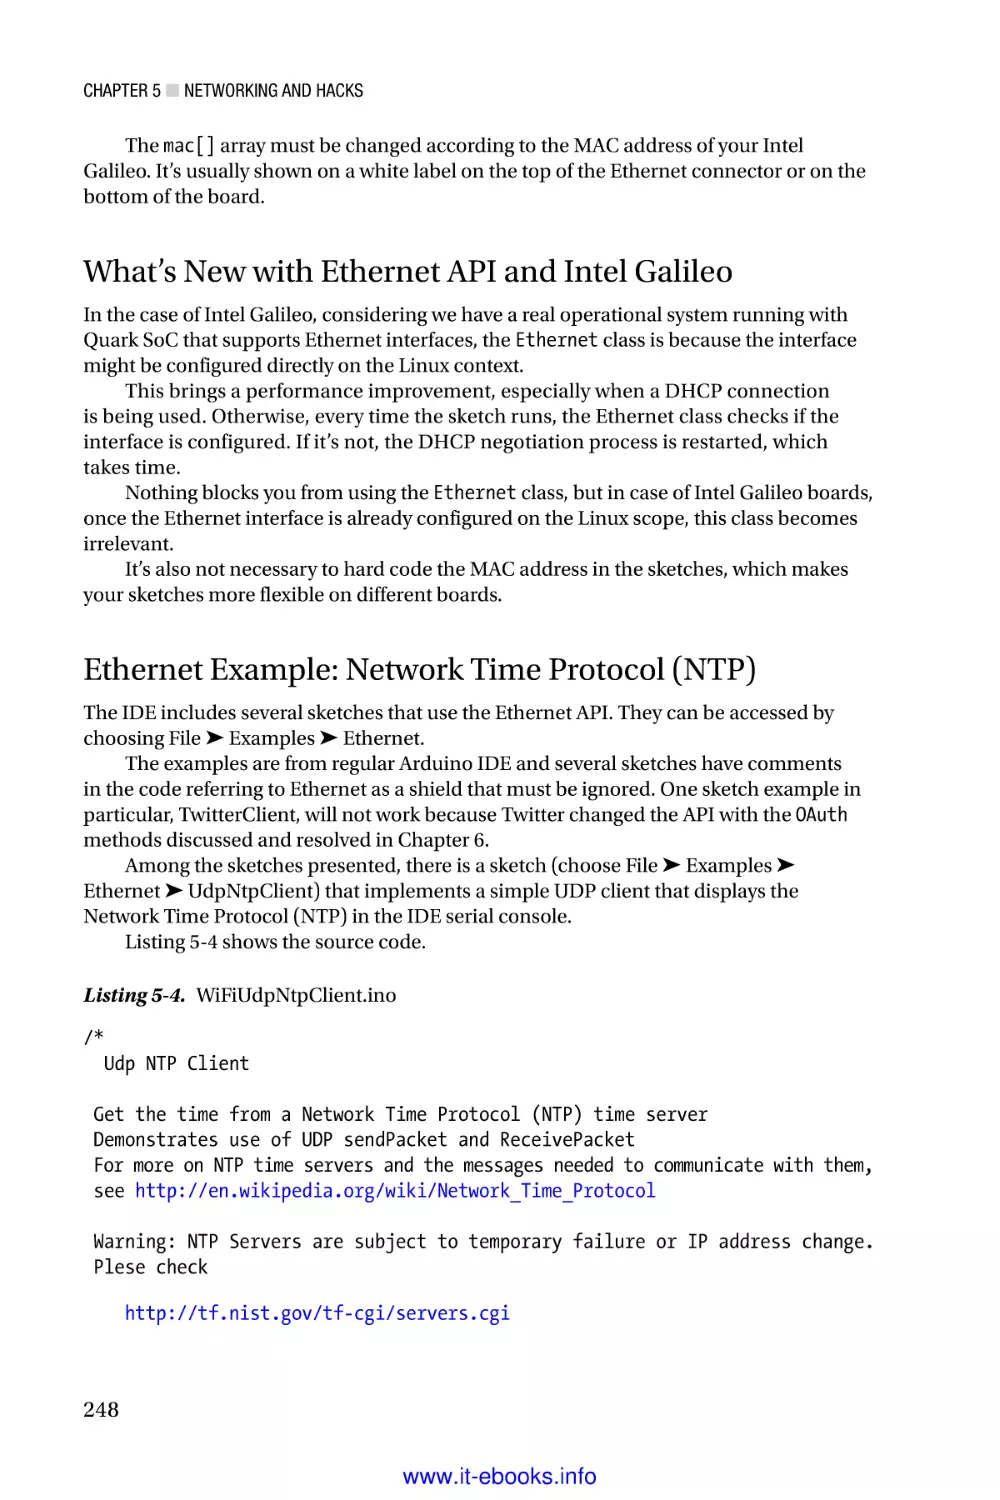 What’s New with Ethernet API and Intel Galileo
Ethernet Example